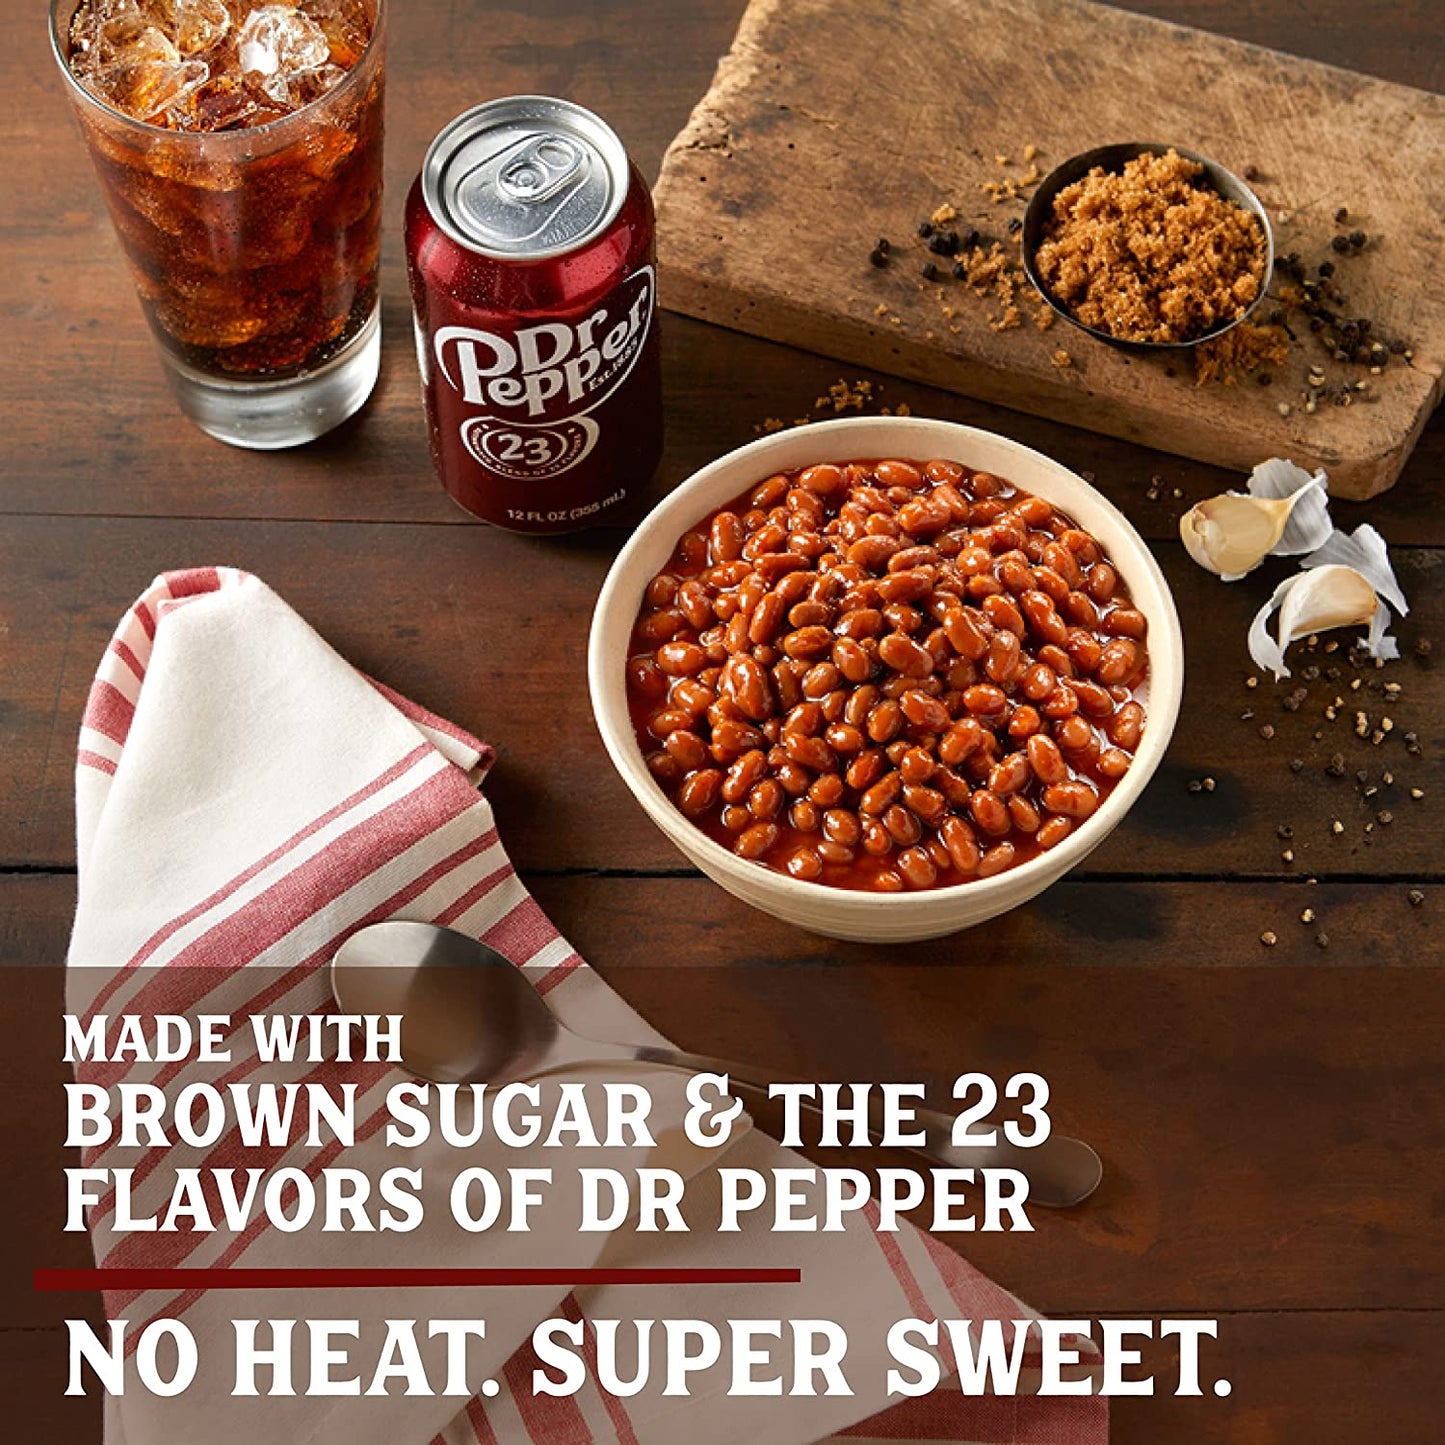 Serious Bean Co Sweet & Sassy Dr Pepper Baked Beans, Wholesale (2 lbs (908g) x 12 Pack)